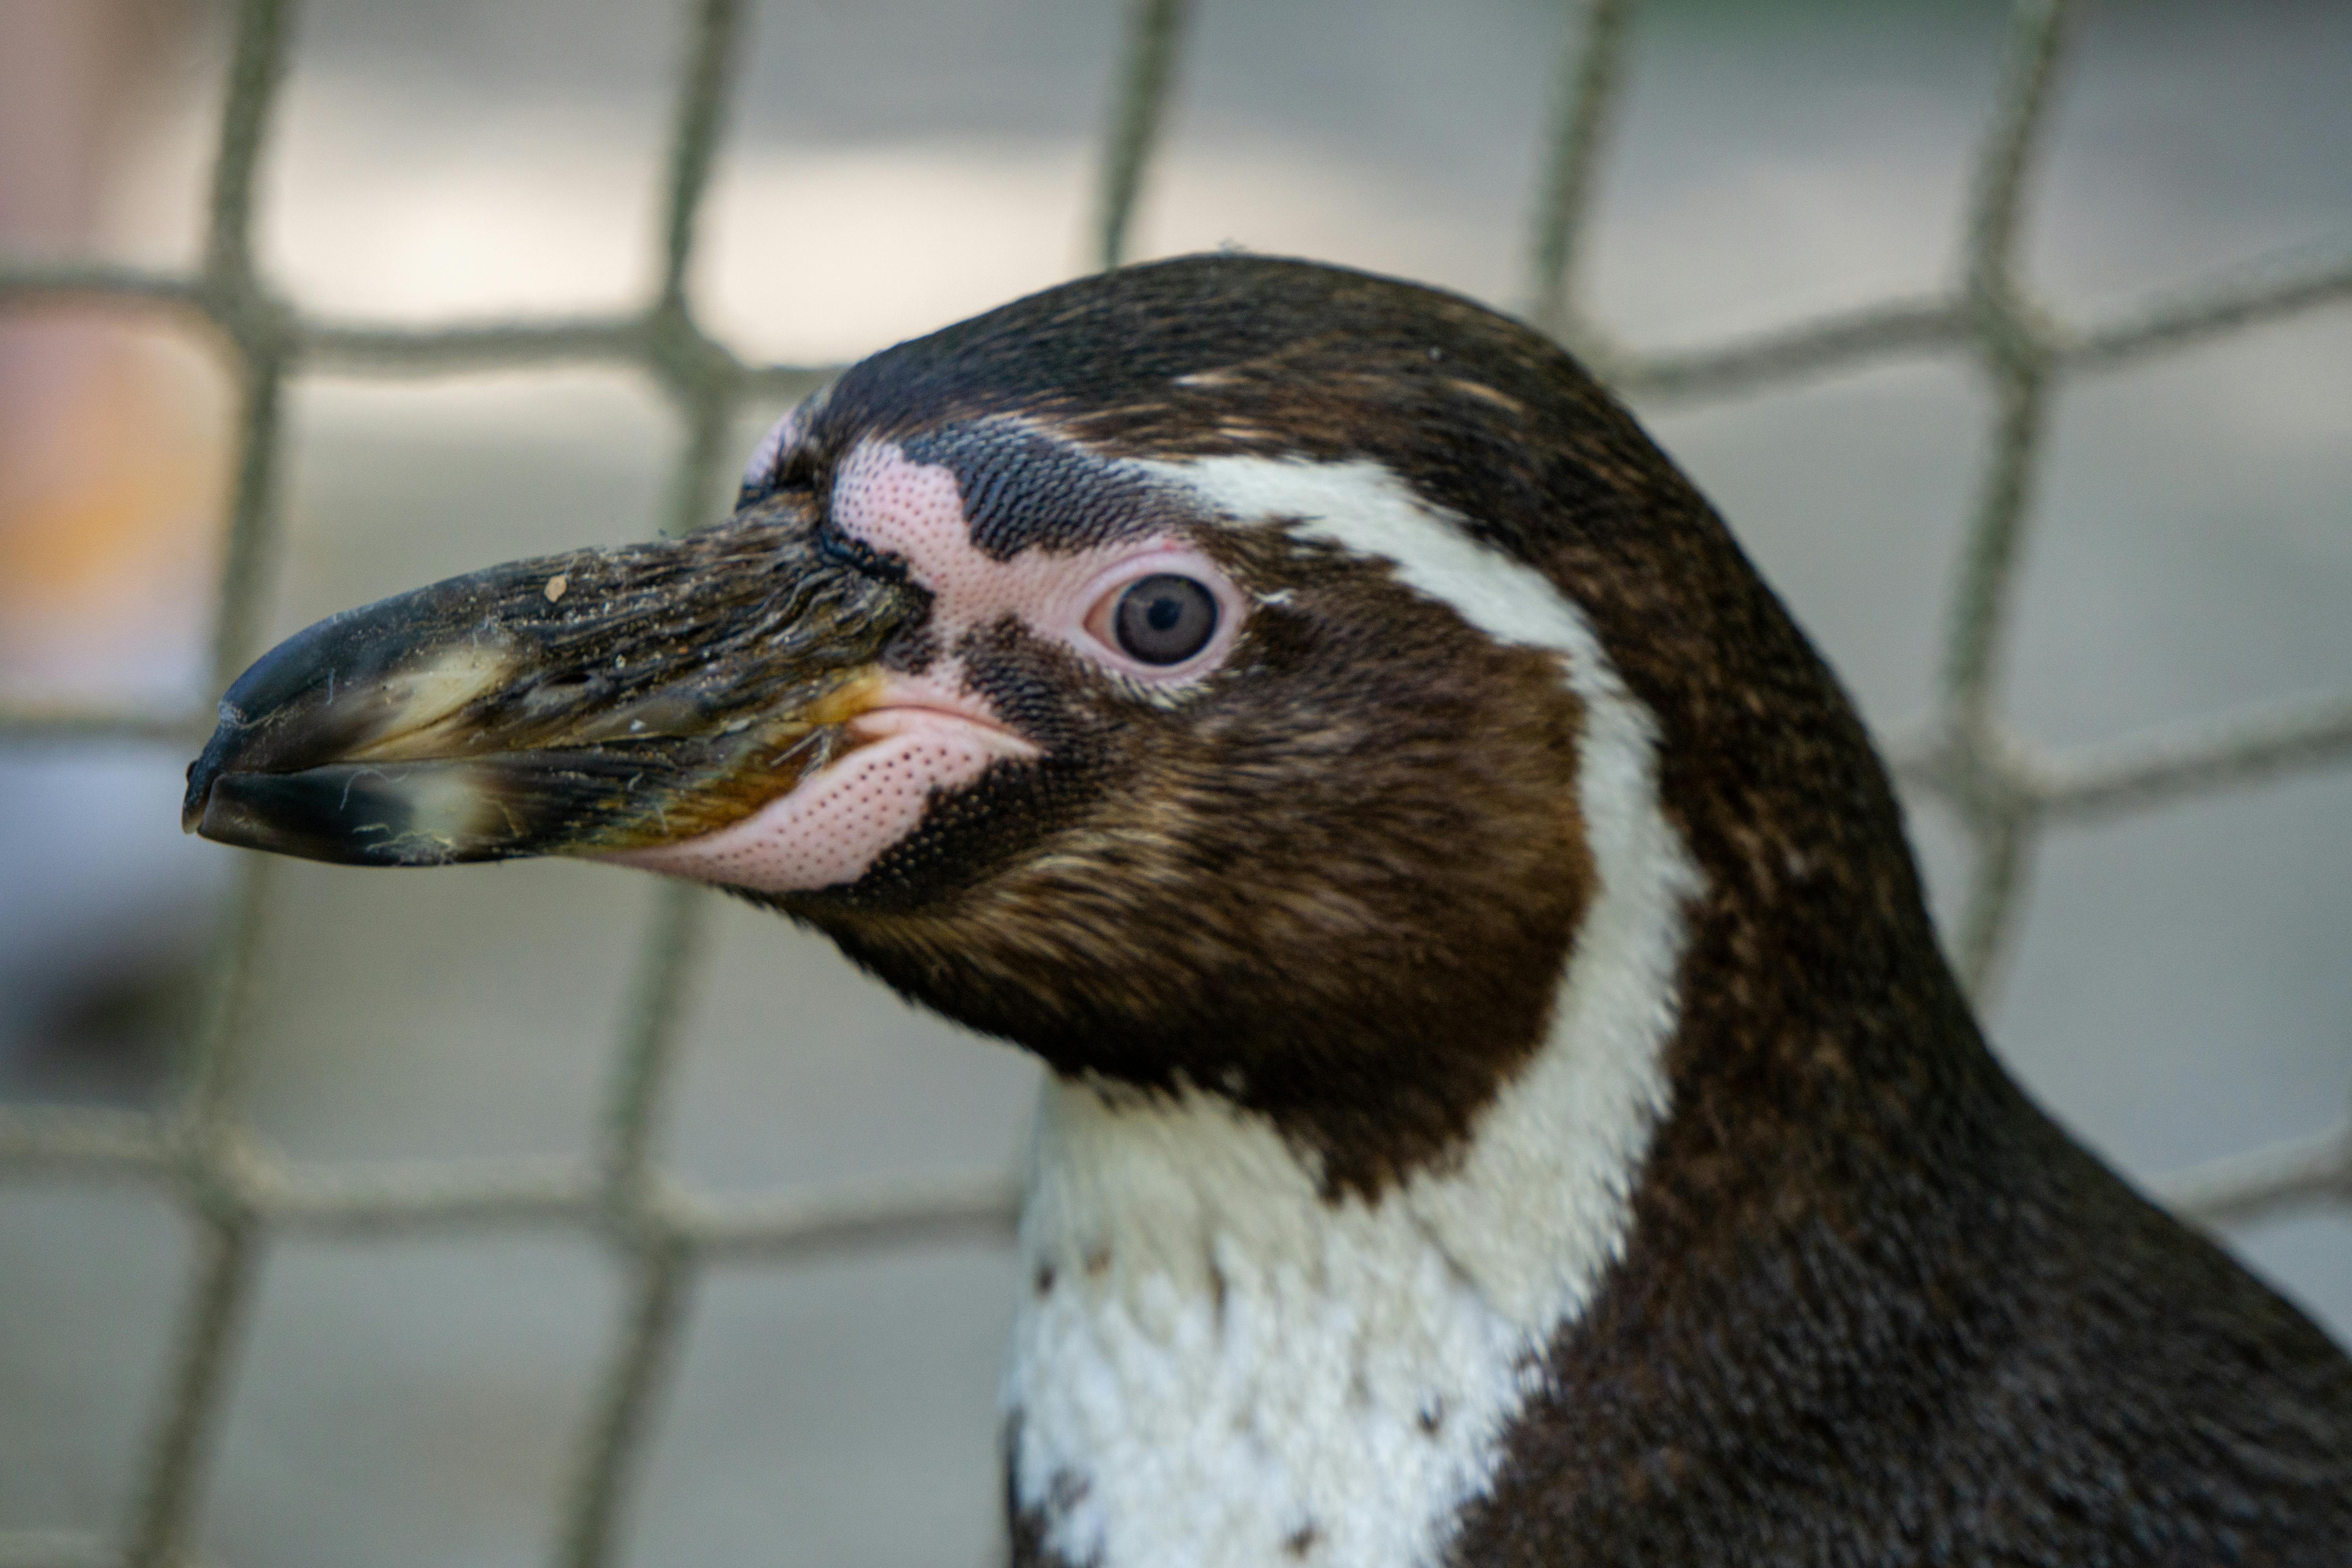 what does a penguin's mouth look like